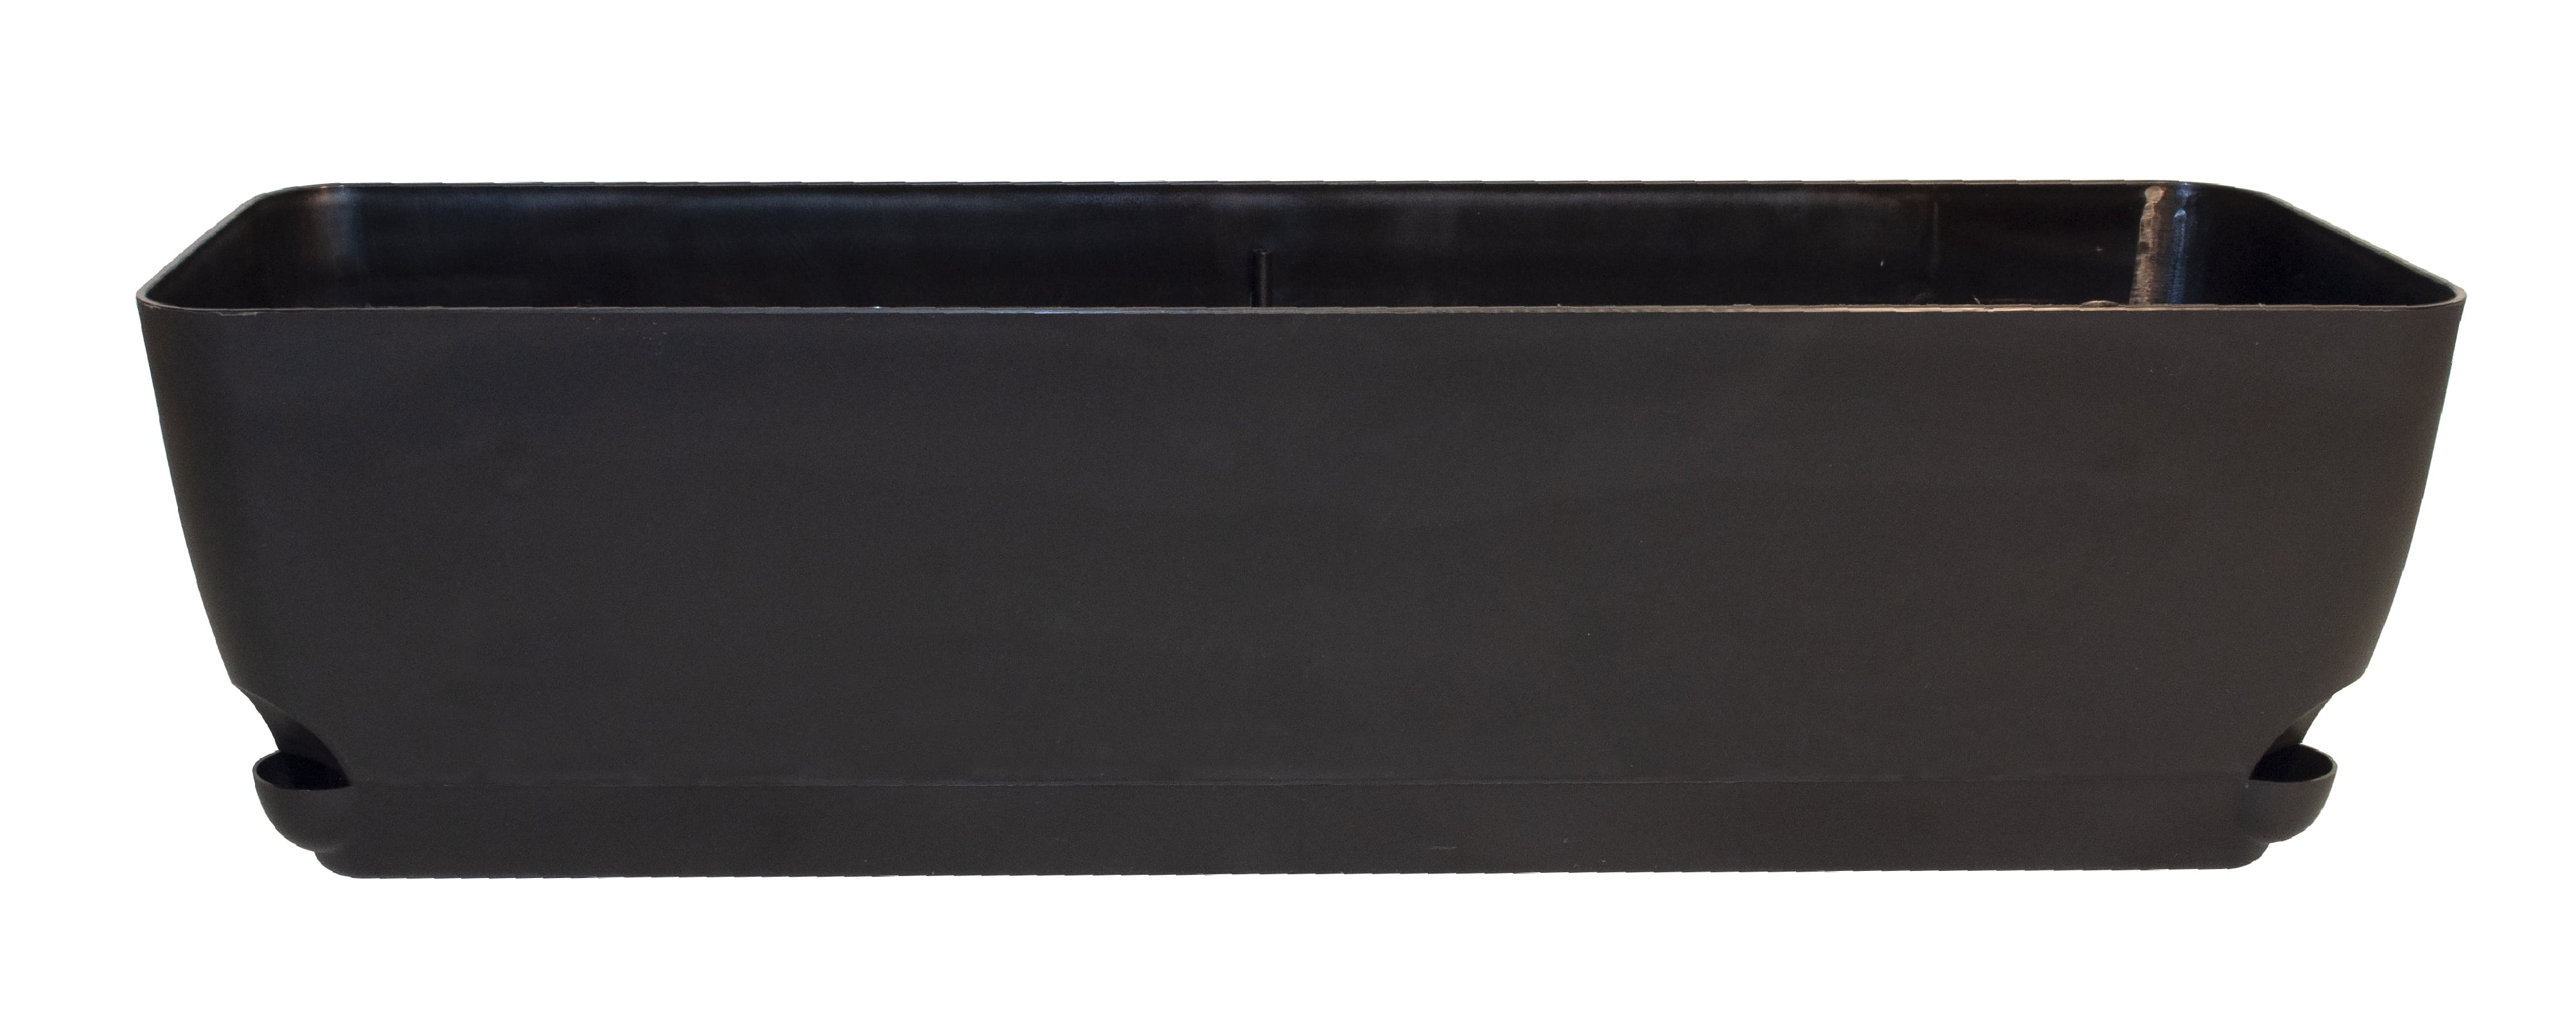 Mainstays 24" x 7" x 6" Rectangle Black Resin Window Box with Self-Watering